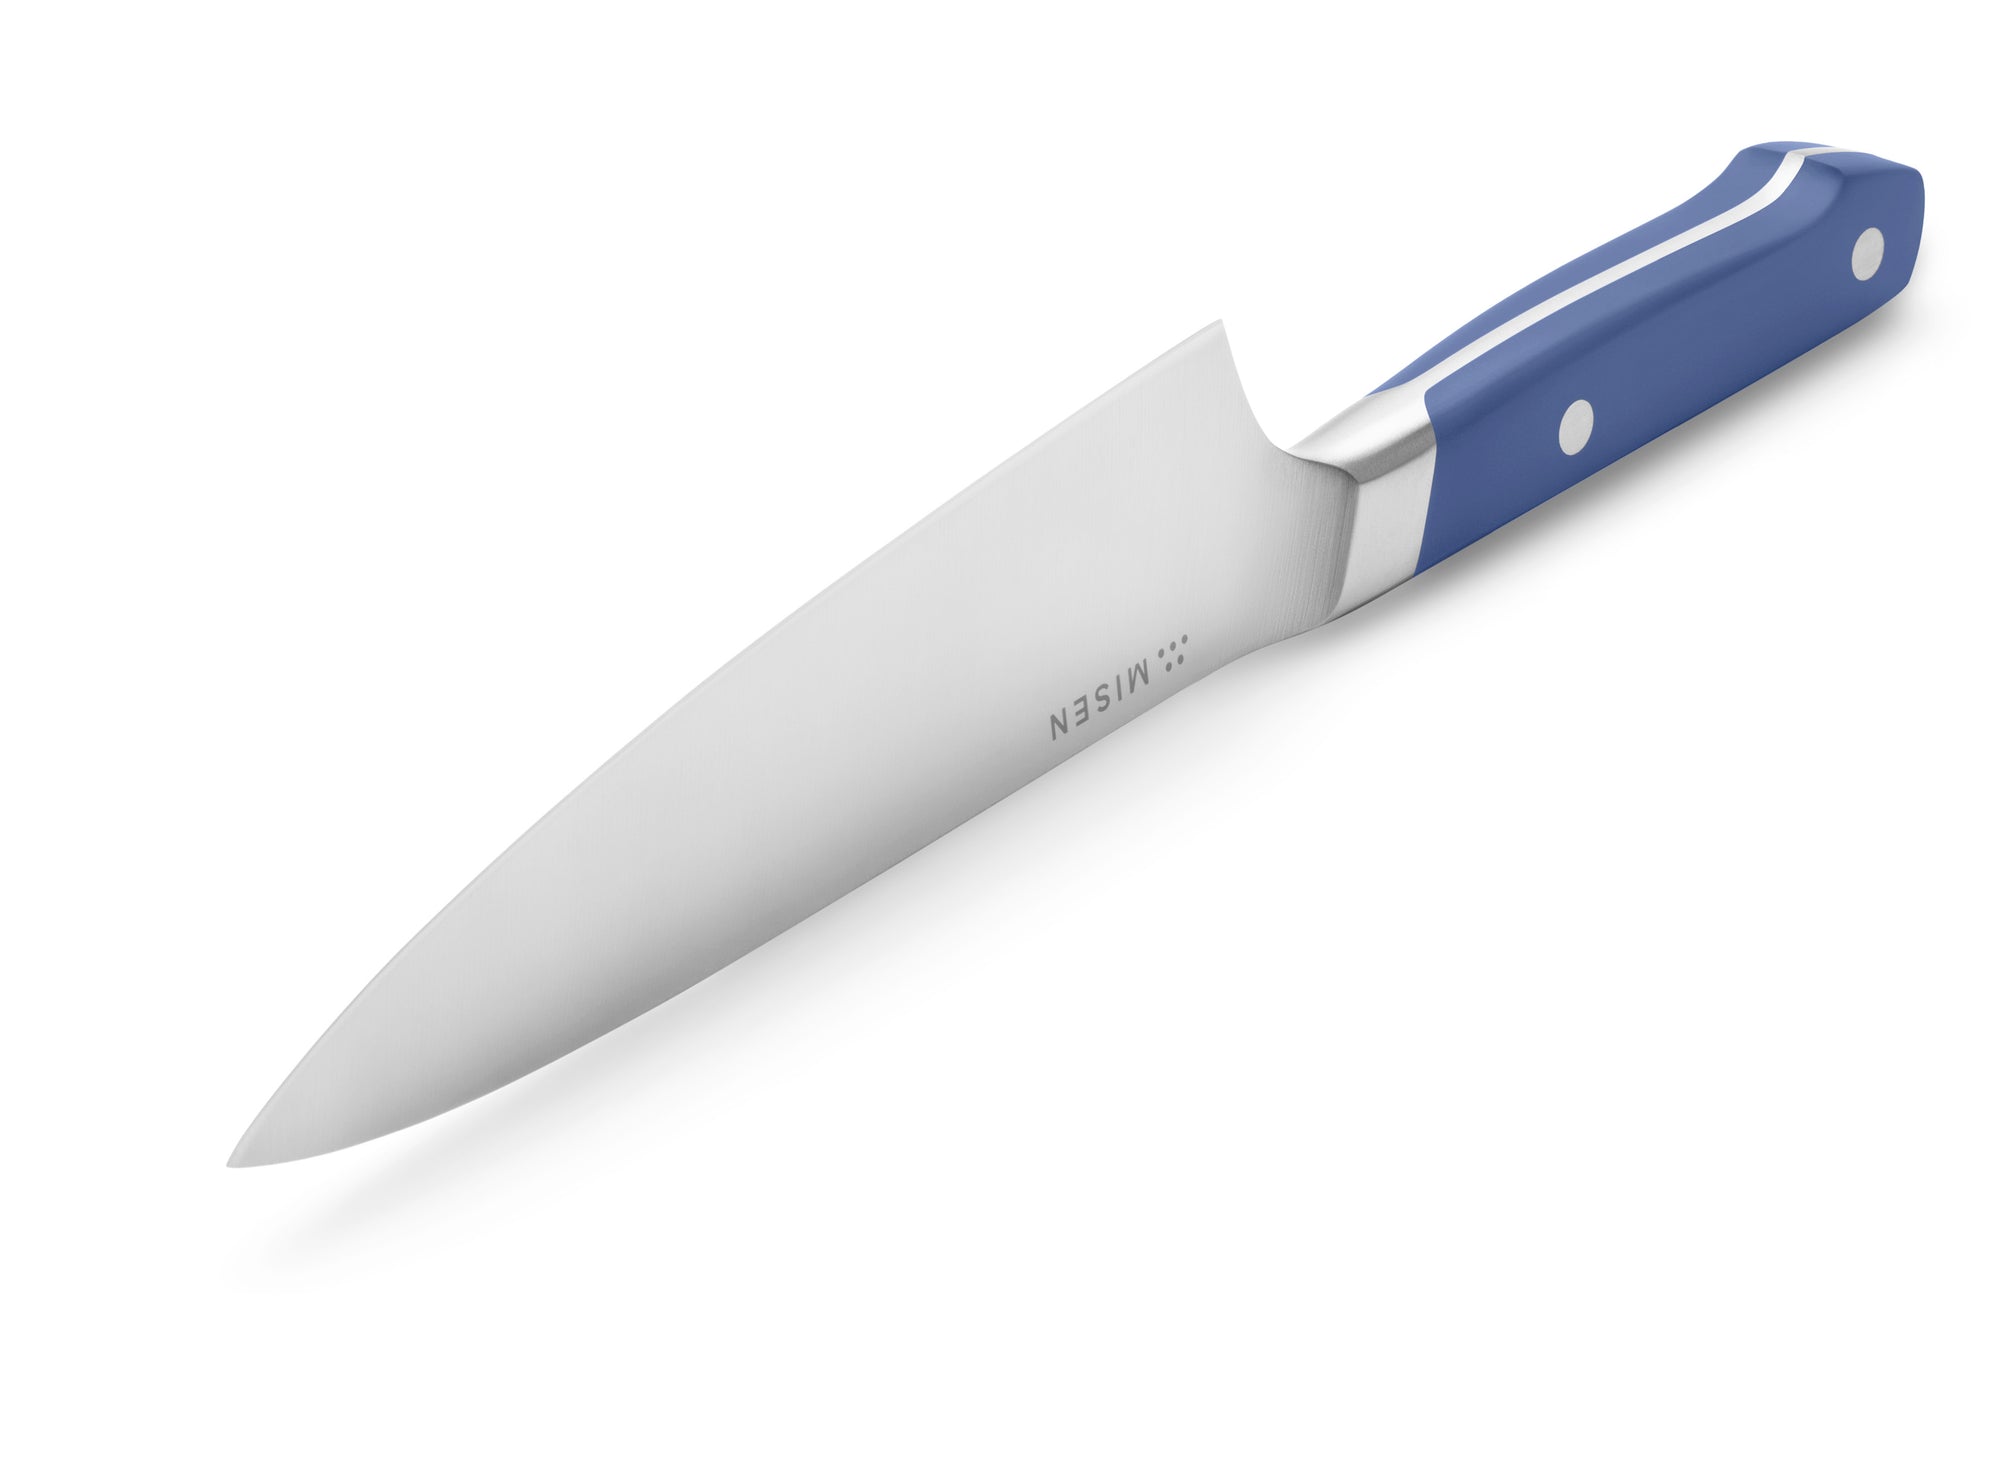 Blade tip and edge of Misen Short Chef's Knife in blue